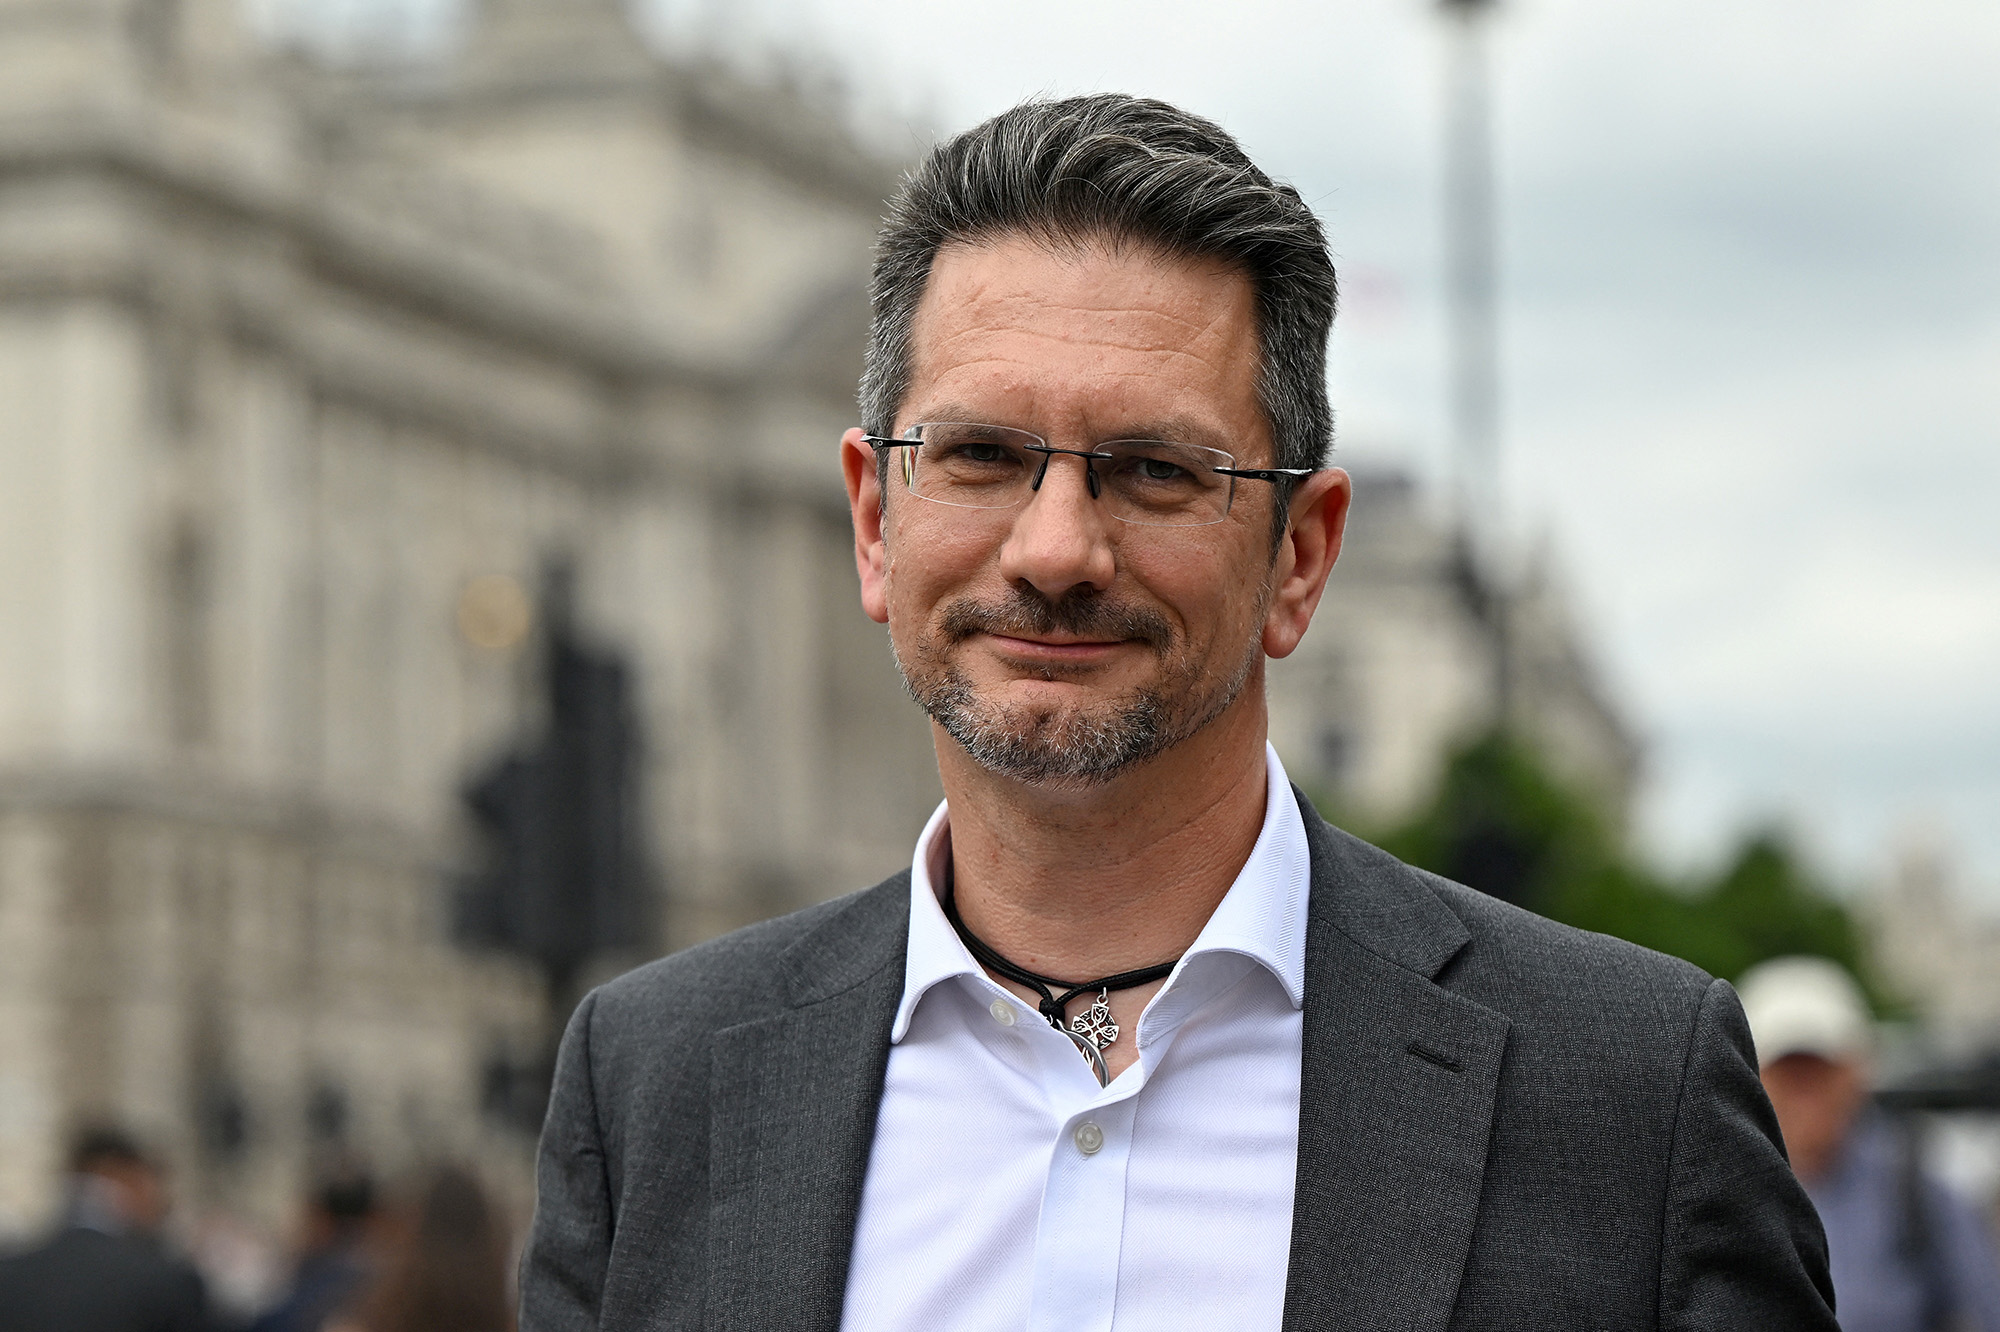 Conservative MP Steve Baker outside the House of Commons in London, England, on July 6.